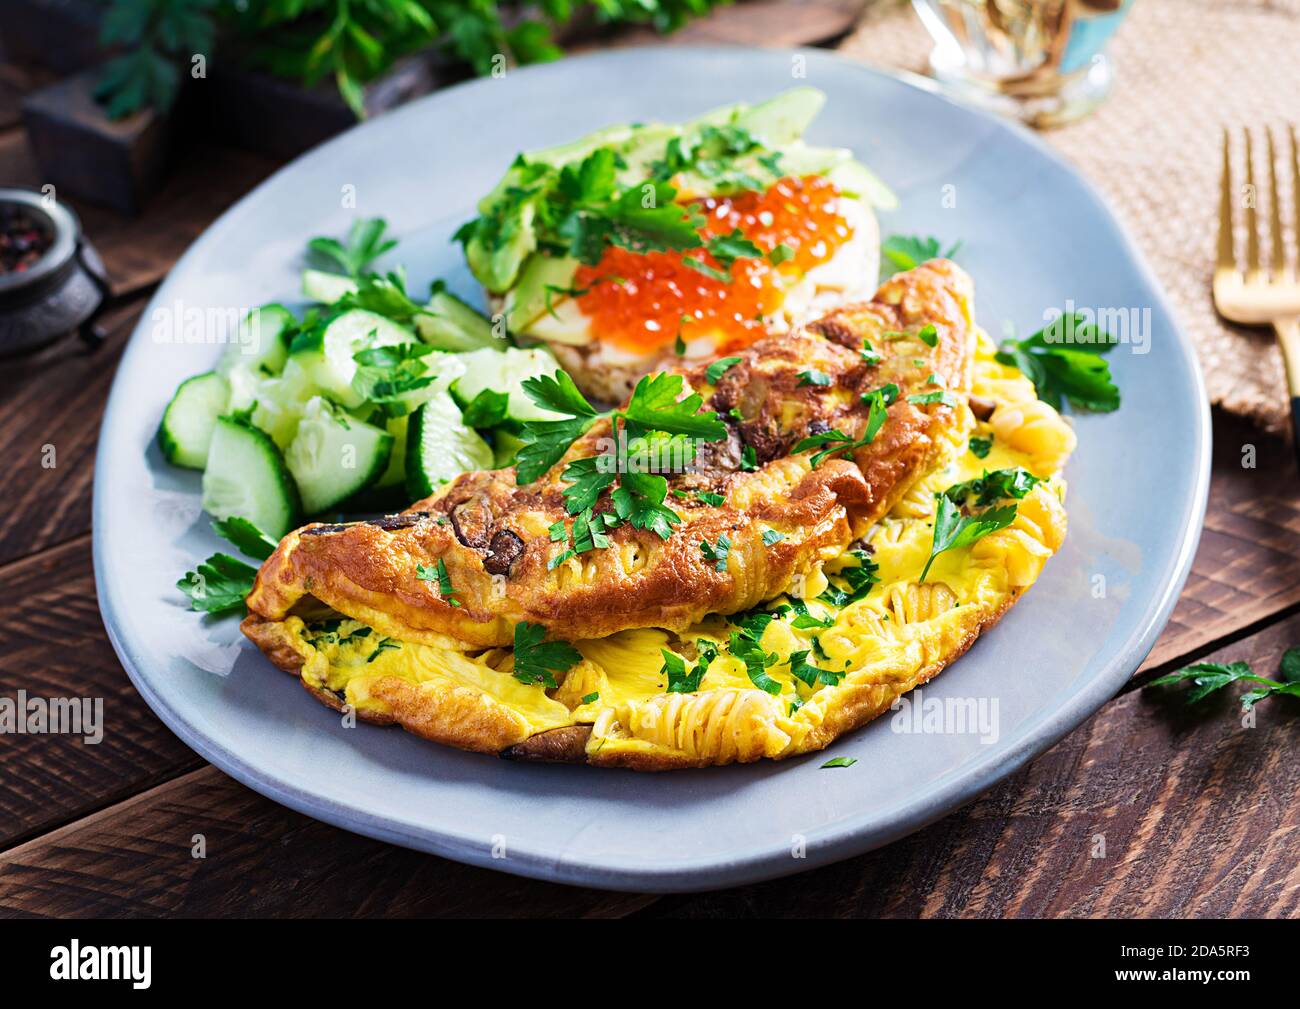 Omelette with forest mushroom, fusilli pasta and sandwich wich red caviar, avocado on plate.  Frittata - italian omelet. Stock Photo